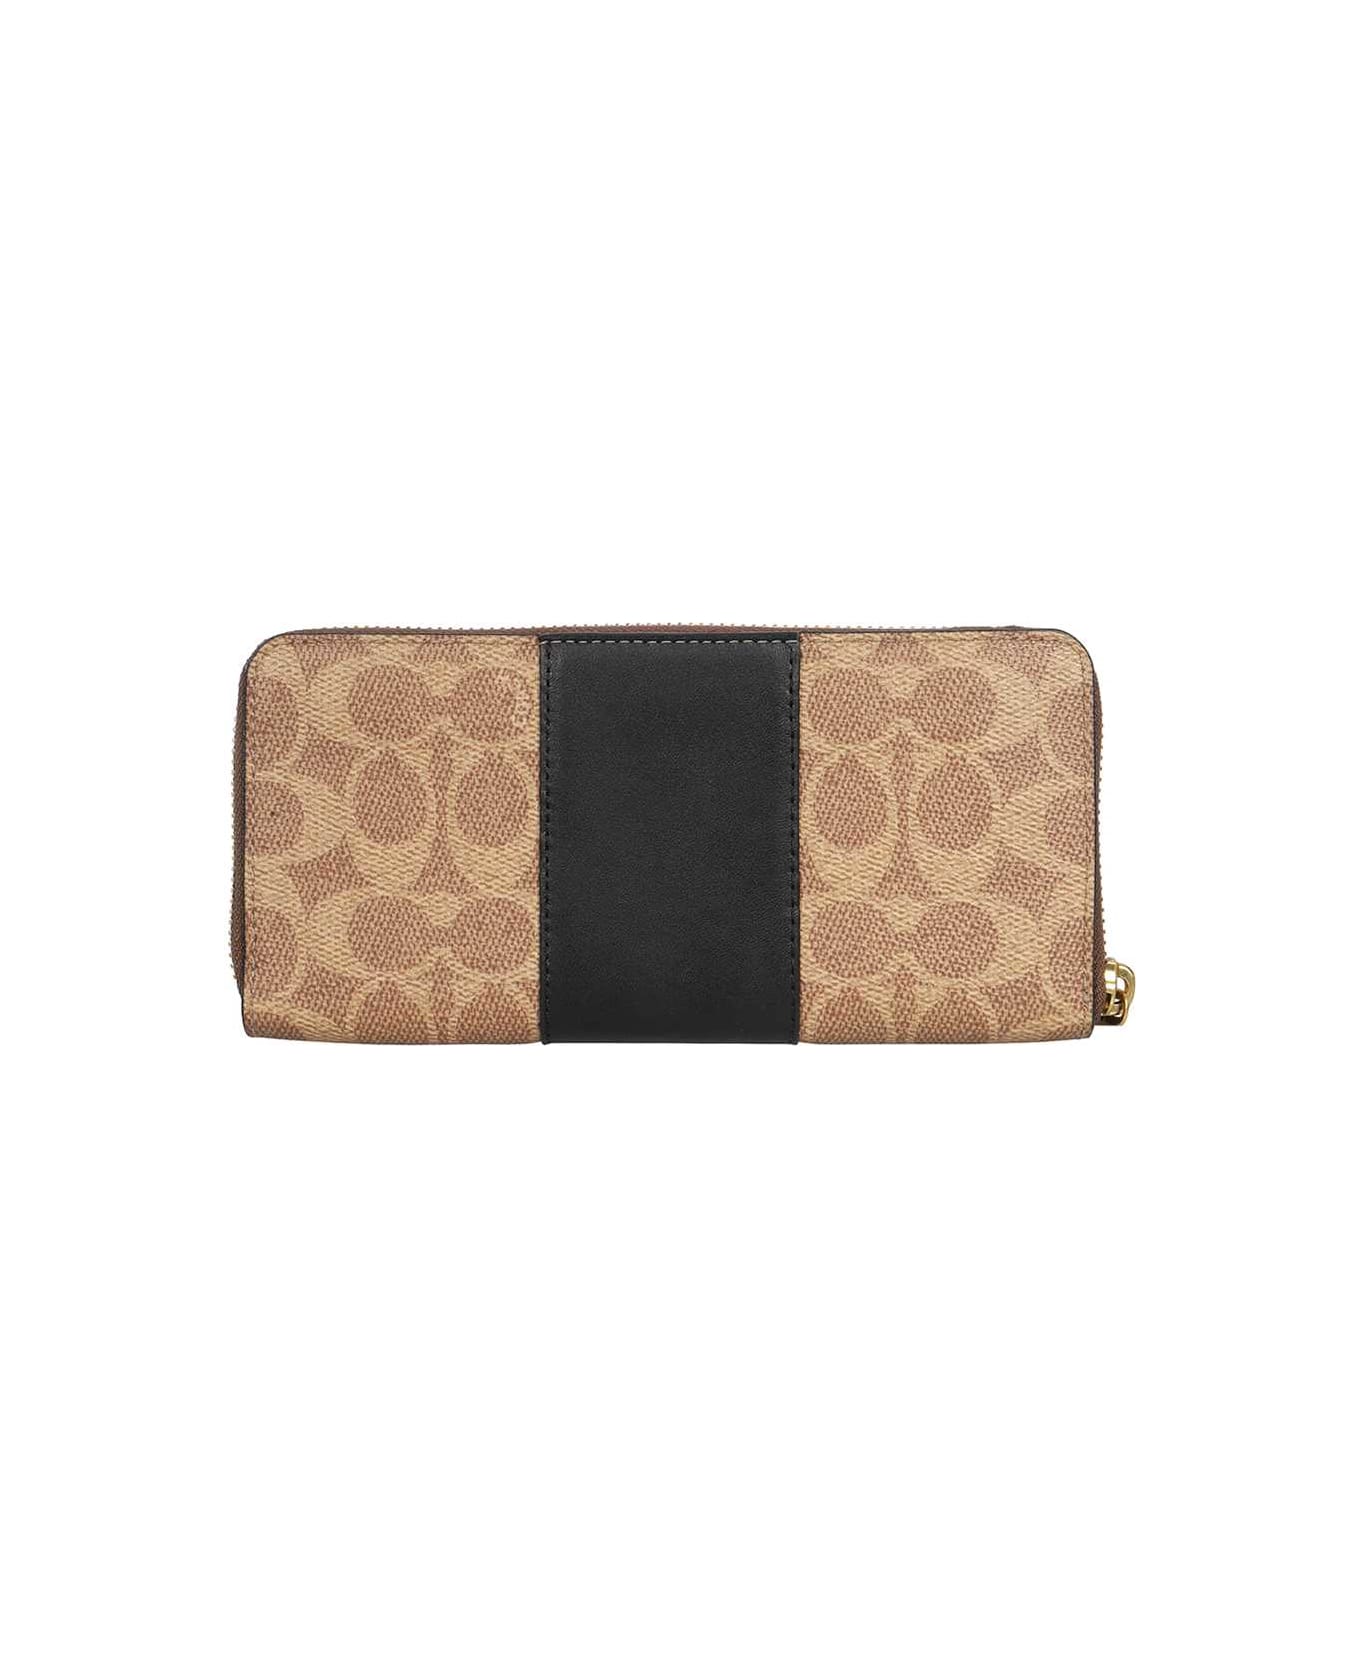 Coach Coated Canvas Wallet - Beige